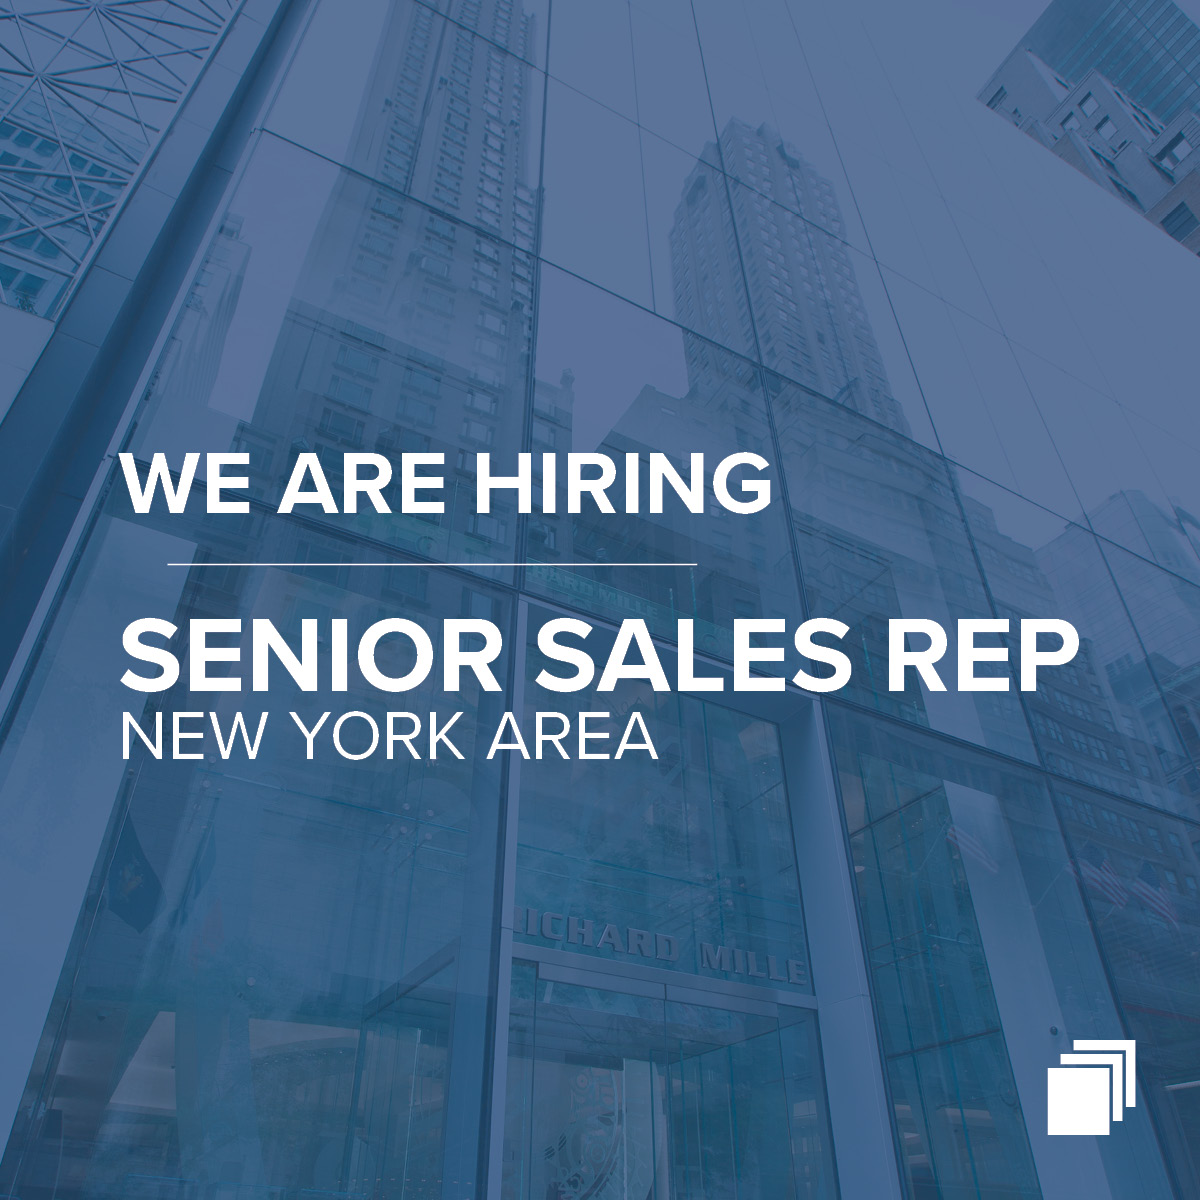 We are hiring a NY based Sales Rep!